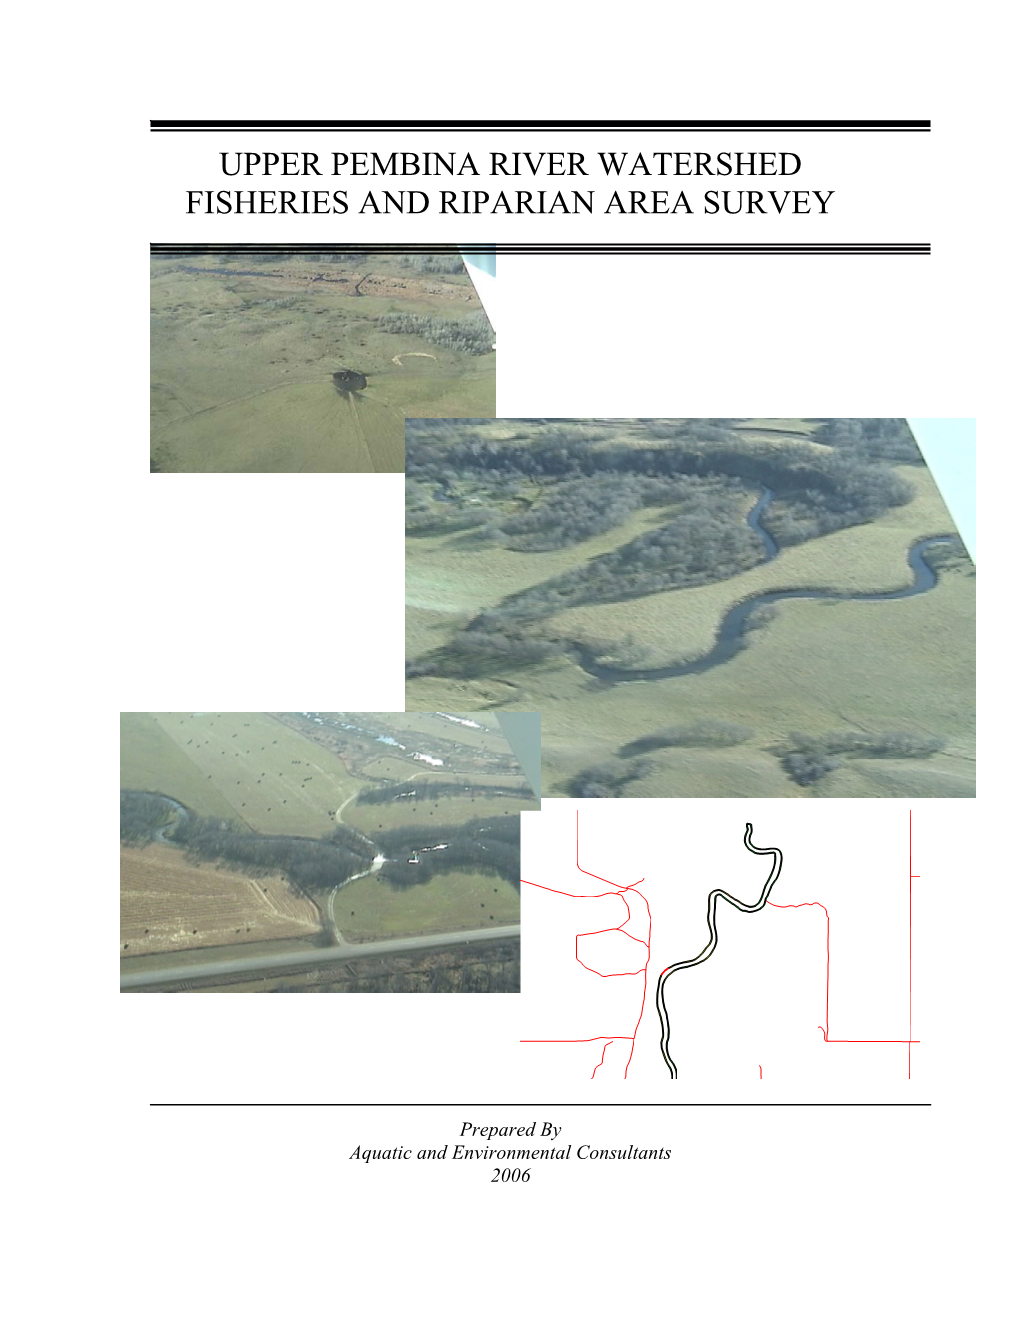 Upper Pembina River Watershed Fisheries and Riparian Area Survey